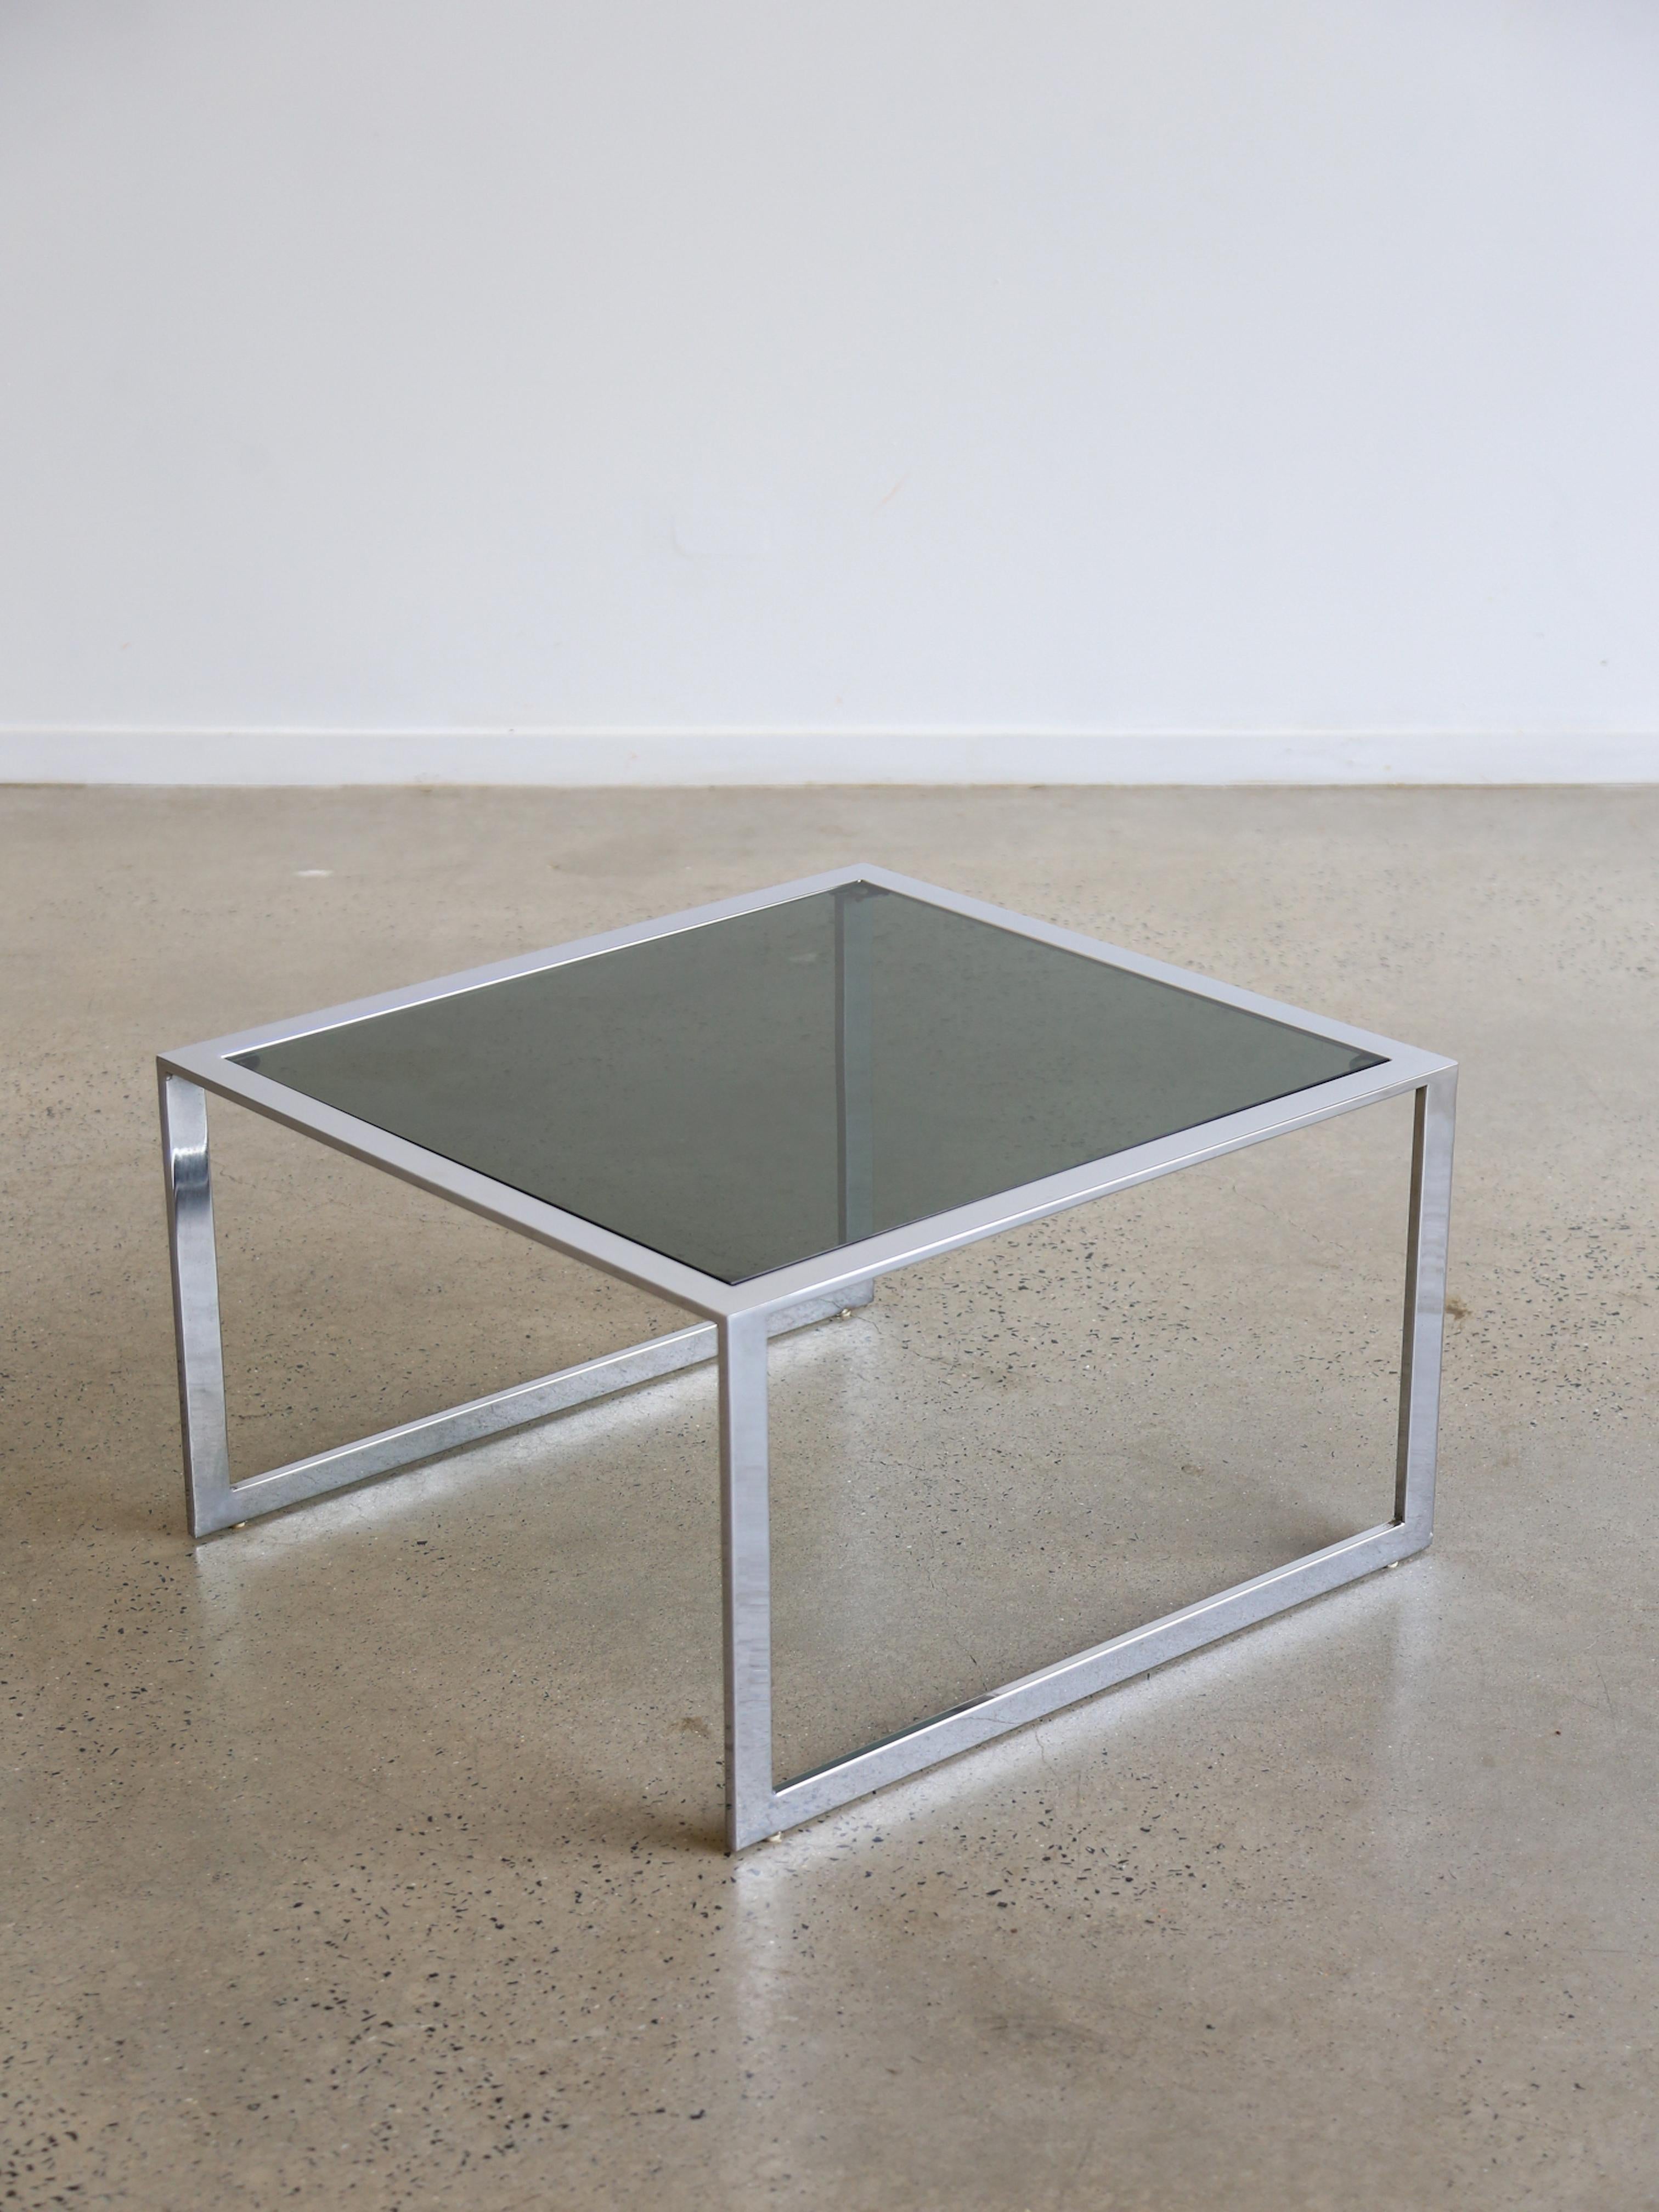 Mid-century modern design often incorporated geometric shapes, and a square-rectangular coffee table is a good example of this. The square shape gives the table a symmetrical and balanced look.

The use of chrome or polished metal frames is a common